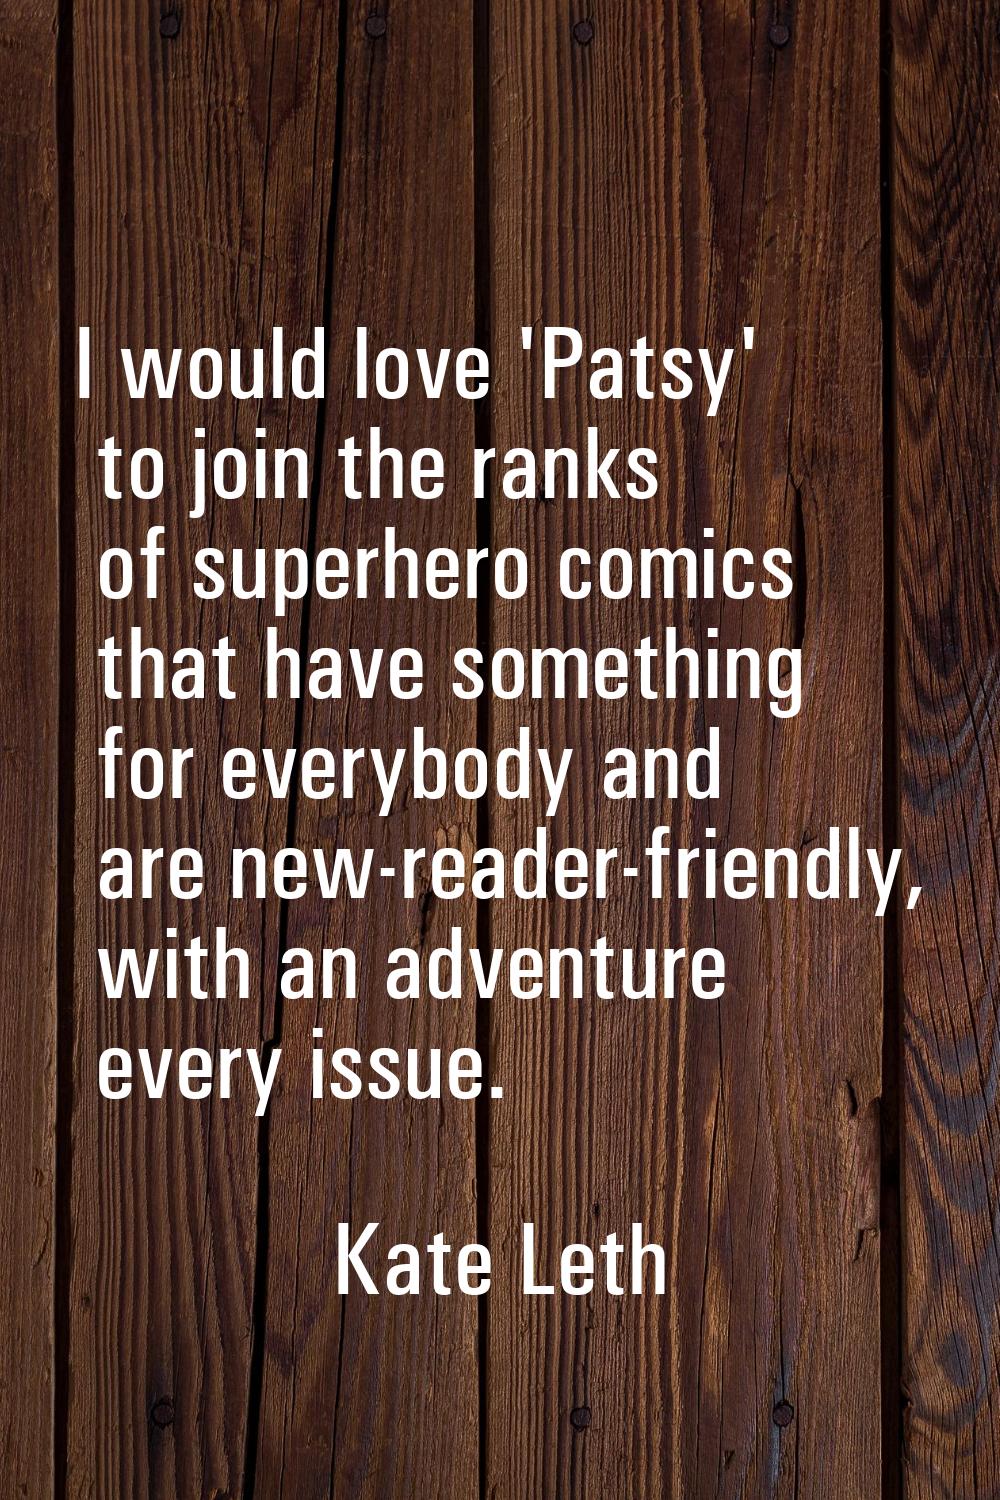 I would love 'Patsy' to join the ranks of superhero comics that have something for everybody and ar